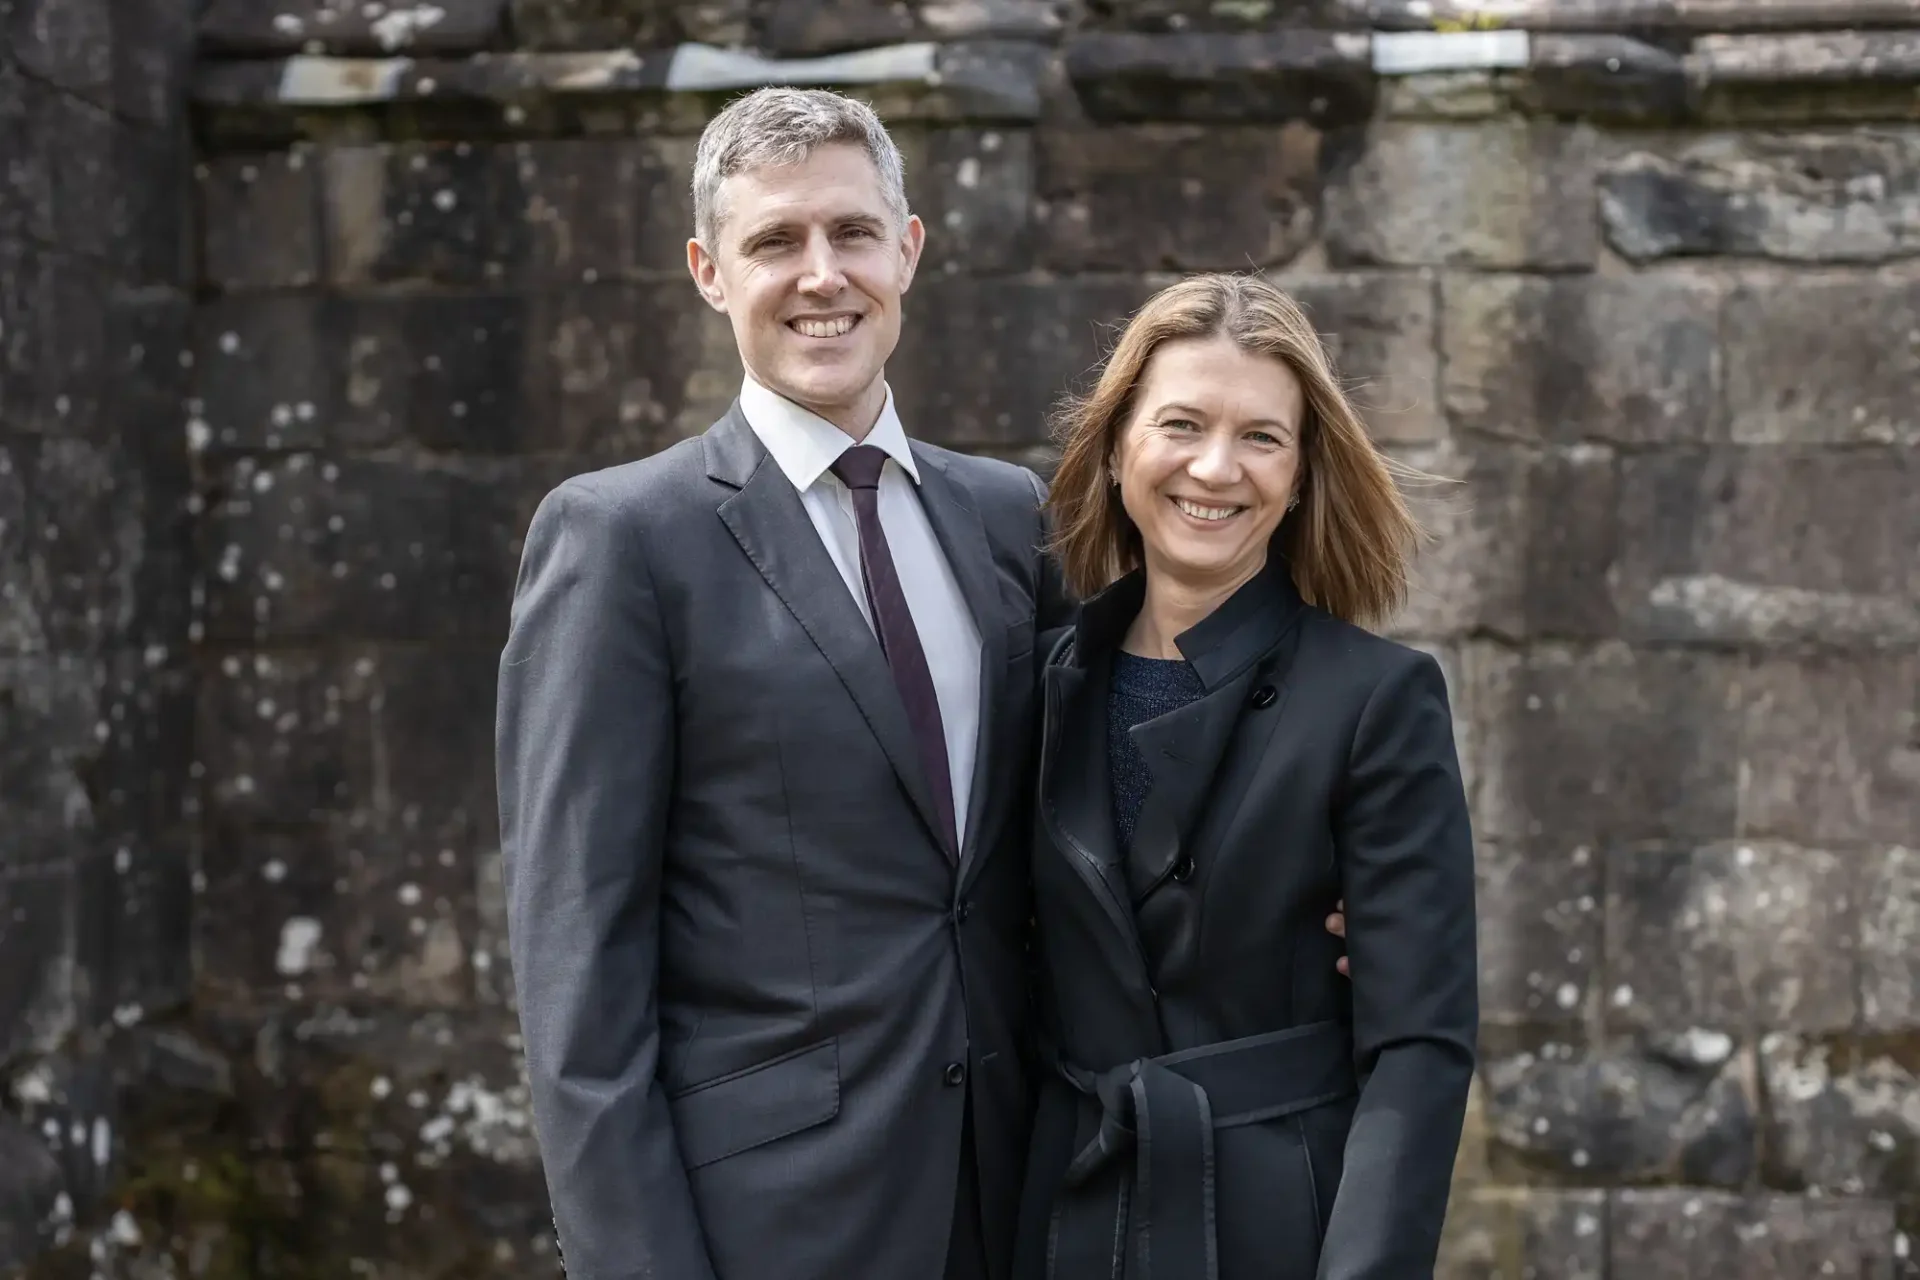 A man and a woman, both dressed in formal suits, stand arm in arm smiling in front of a stone wall.